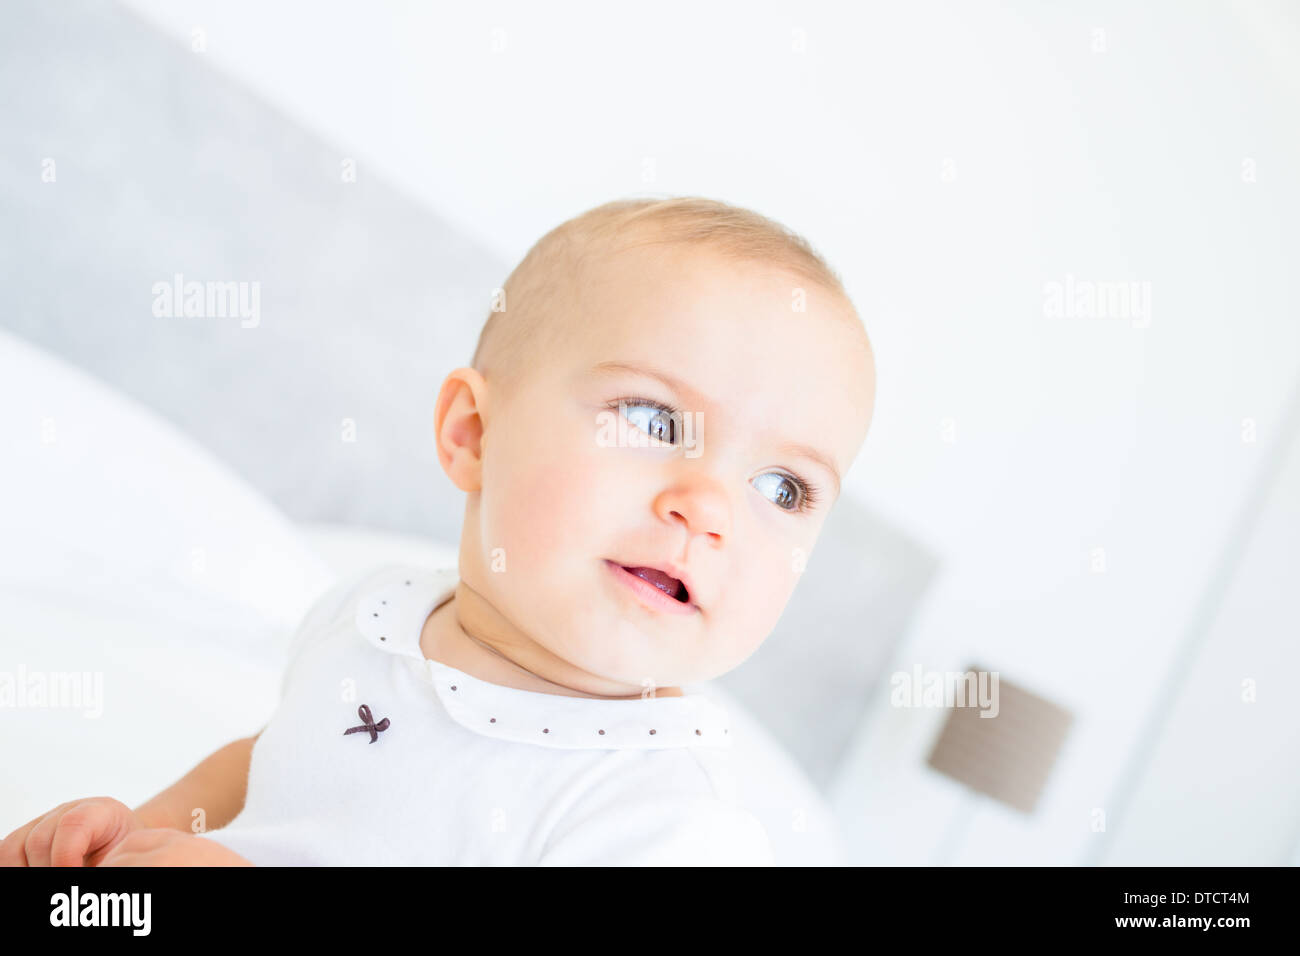 Closeup portrait of a smiling cute baby Stock Photo